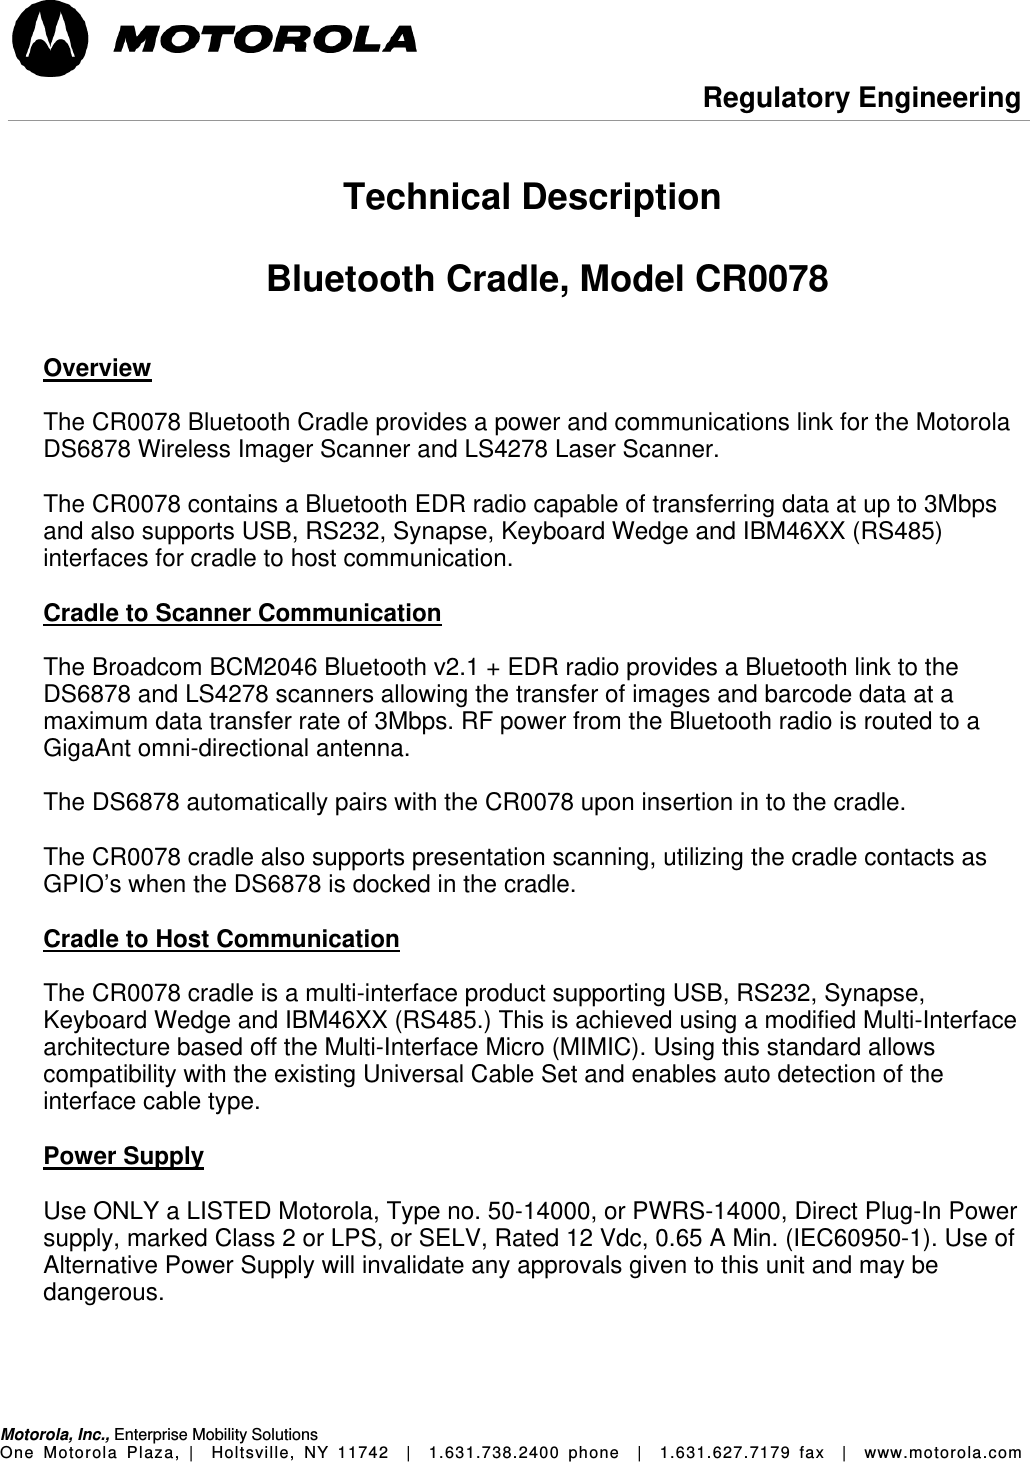  Regulatory Engineering Motorola, Inc., Enterprise Mobility Solutions One Motorola Plaza, |  Holtsville, NY 11742  |  1.631.738.2400 phone  |  1.631.627.7179 fax  |  www.motorola.com   Technical Description  Bluetooth Cradle, Model CR0078   Overview  The CR0078 Bluetooth Cradle provides a power and communications link for the Motorola DS6878 Wireless Imager Scanner and LS4278 Laser Scanner.  The CR0078 contains a Bluetooth EDR radio capable of transferring data at up to 3Mbps and also supports USB, RS232, Synapse, Keyboard Wedge and IBM46XX (RS485) interfaces for cradle to host communication.  Cradle to Scanner Communication  The Broadcom BCM2046 Bluetooth v2.1 + EDR radio provides a Bluetooth link to the DS6878 and LS4278 scanners allowing the transfer of images and barcode data at a maximum data transfer rate of 3Mbps. RF power from the Bluetooth radio is routed to a GigaAnt omni-directional antenna.    The DS6878 automatically pairs with the CR0078 upon insertion in to the cradle.   The CR0078 cradle also supports presentation scanning, utilizing the cradle contacts as GPIO’s when the DS6878 is docked in the cradle.  Cradle to Host Communication  The CR0078 cradle is a multi-interface product supporting USB, RS232, Synapse, Keyboard Wedge and IBM46XX (RS485.) This is achieved using a modified Multi-Interface architecture based off the Multi-Interface Micro (MIMIC). Using this standard allows compatibility with the existing Universal Cable Set and enables auto detection of the interface cable type.  Power Supply  Use ONLY a LISTED Motorola, Type no. 50-14000, or PWRS-14000, Direct Plug-In Power supply, marked Class 2 or LPS, or SELV, Rated 12 Vdc, 0.65 A Min. (IEC60950-1). Use of Alternative Power Supply will invalidate any approvals given to this unit and may be dangerous.     